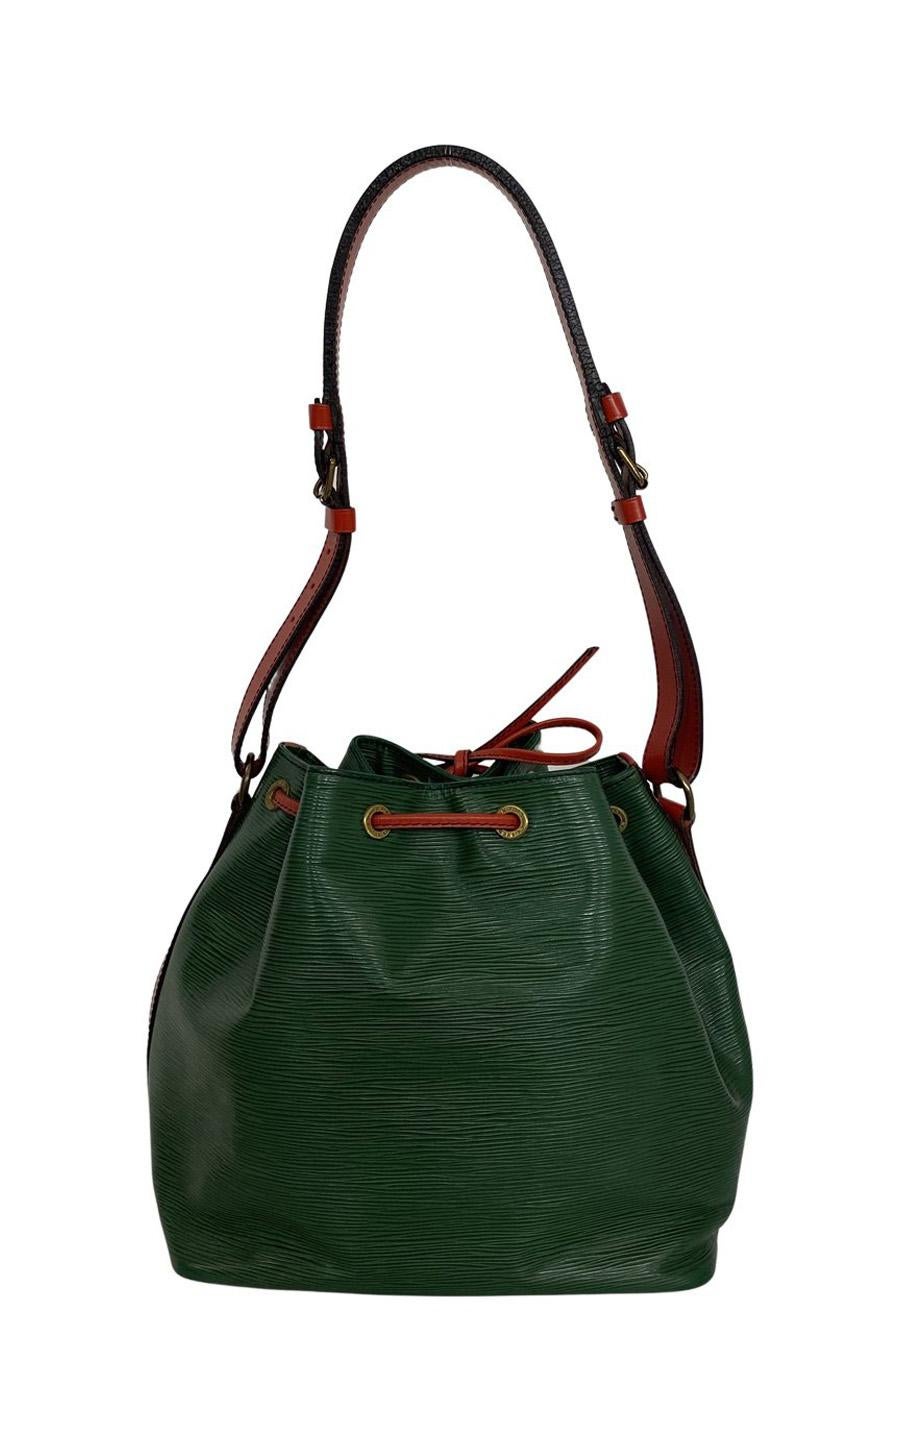 Louis Vuitton ﻿Petit Noé﻿ in green and red Epi Leather. The bag closes with a drawstring and features an adjustable leather shoulder strap. The hardware is gold-colored. The textile lining on the inside of the bag still is in a good condition. The